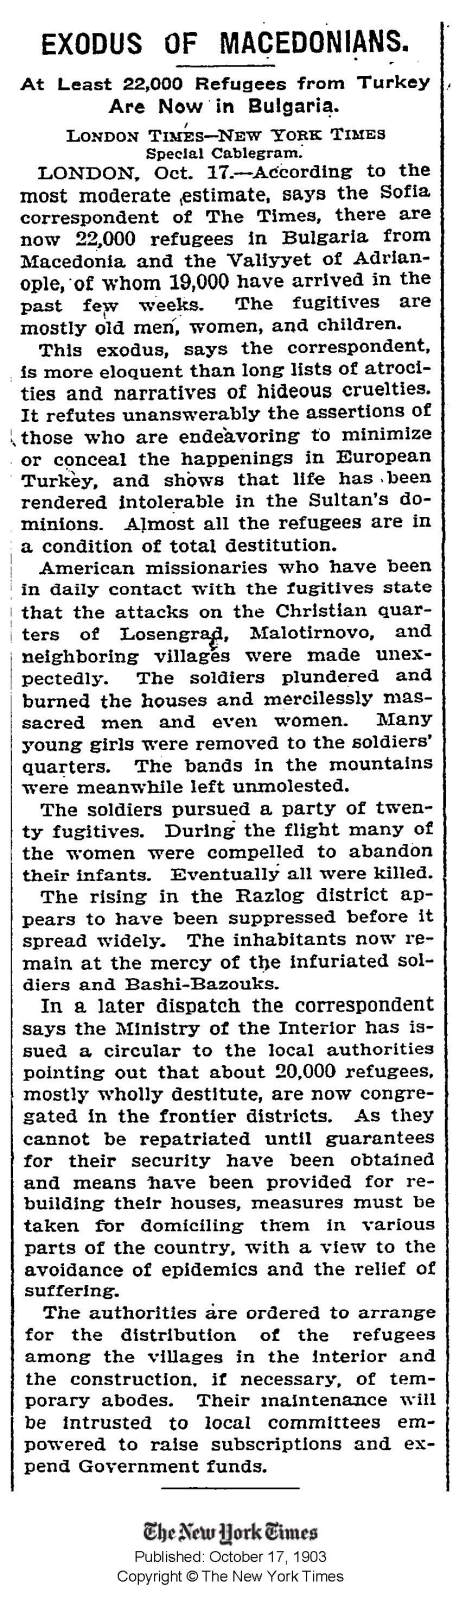 1903.09.17_The New York Times - Exodus of Macedonians